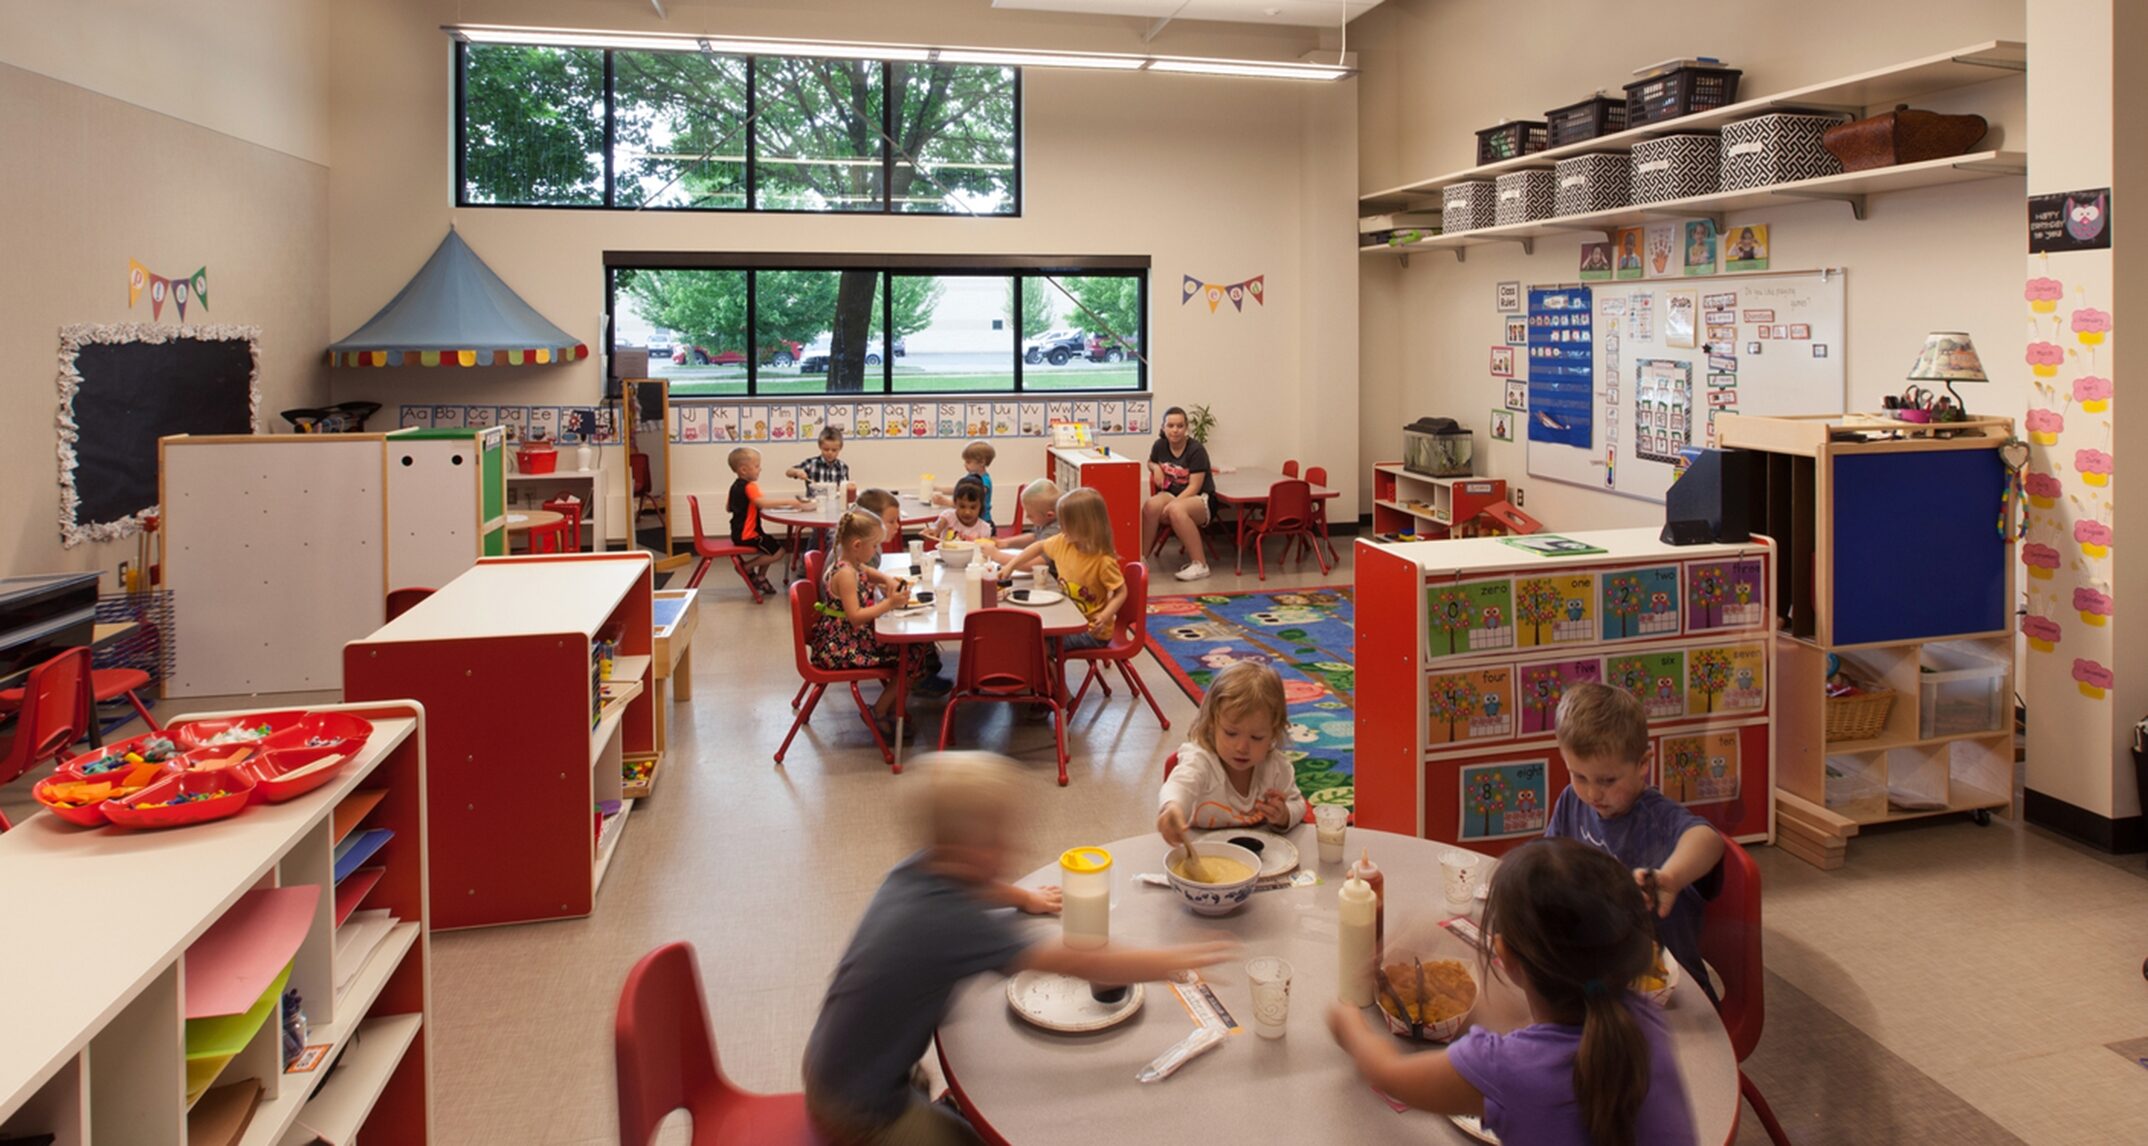 Eating “family style” in the classrooms is fundamentally important for pre-K students’ social and emotional development – Central Valley Early Learning Center